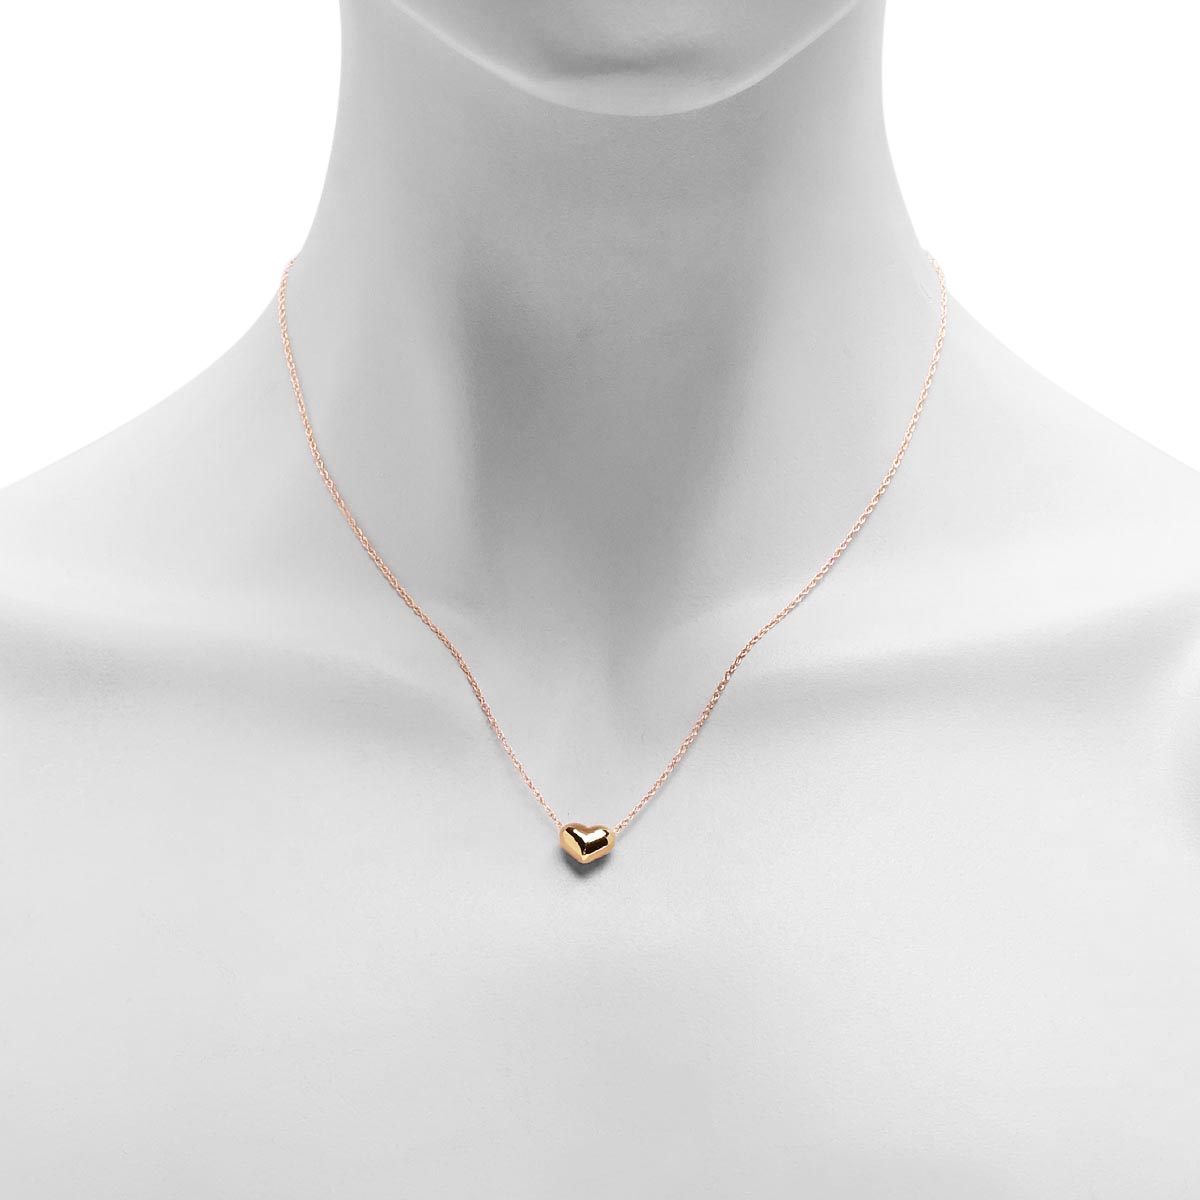 Puffed Heart Necklace in 14kt Yellow Gold